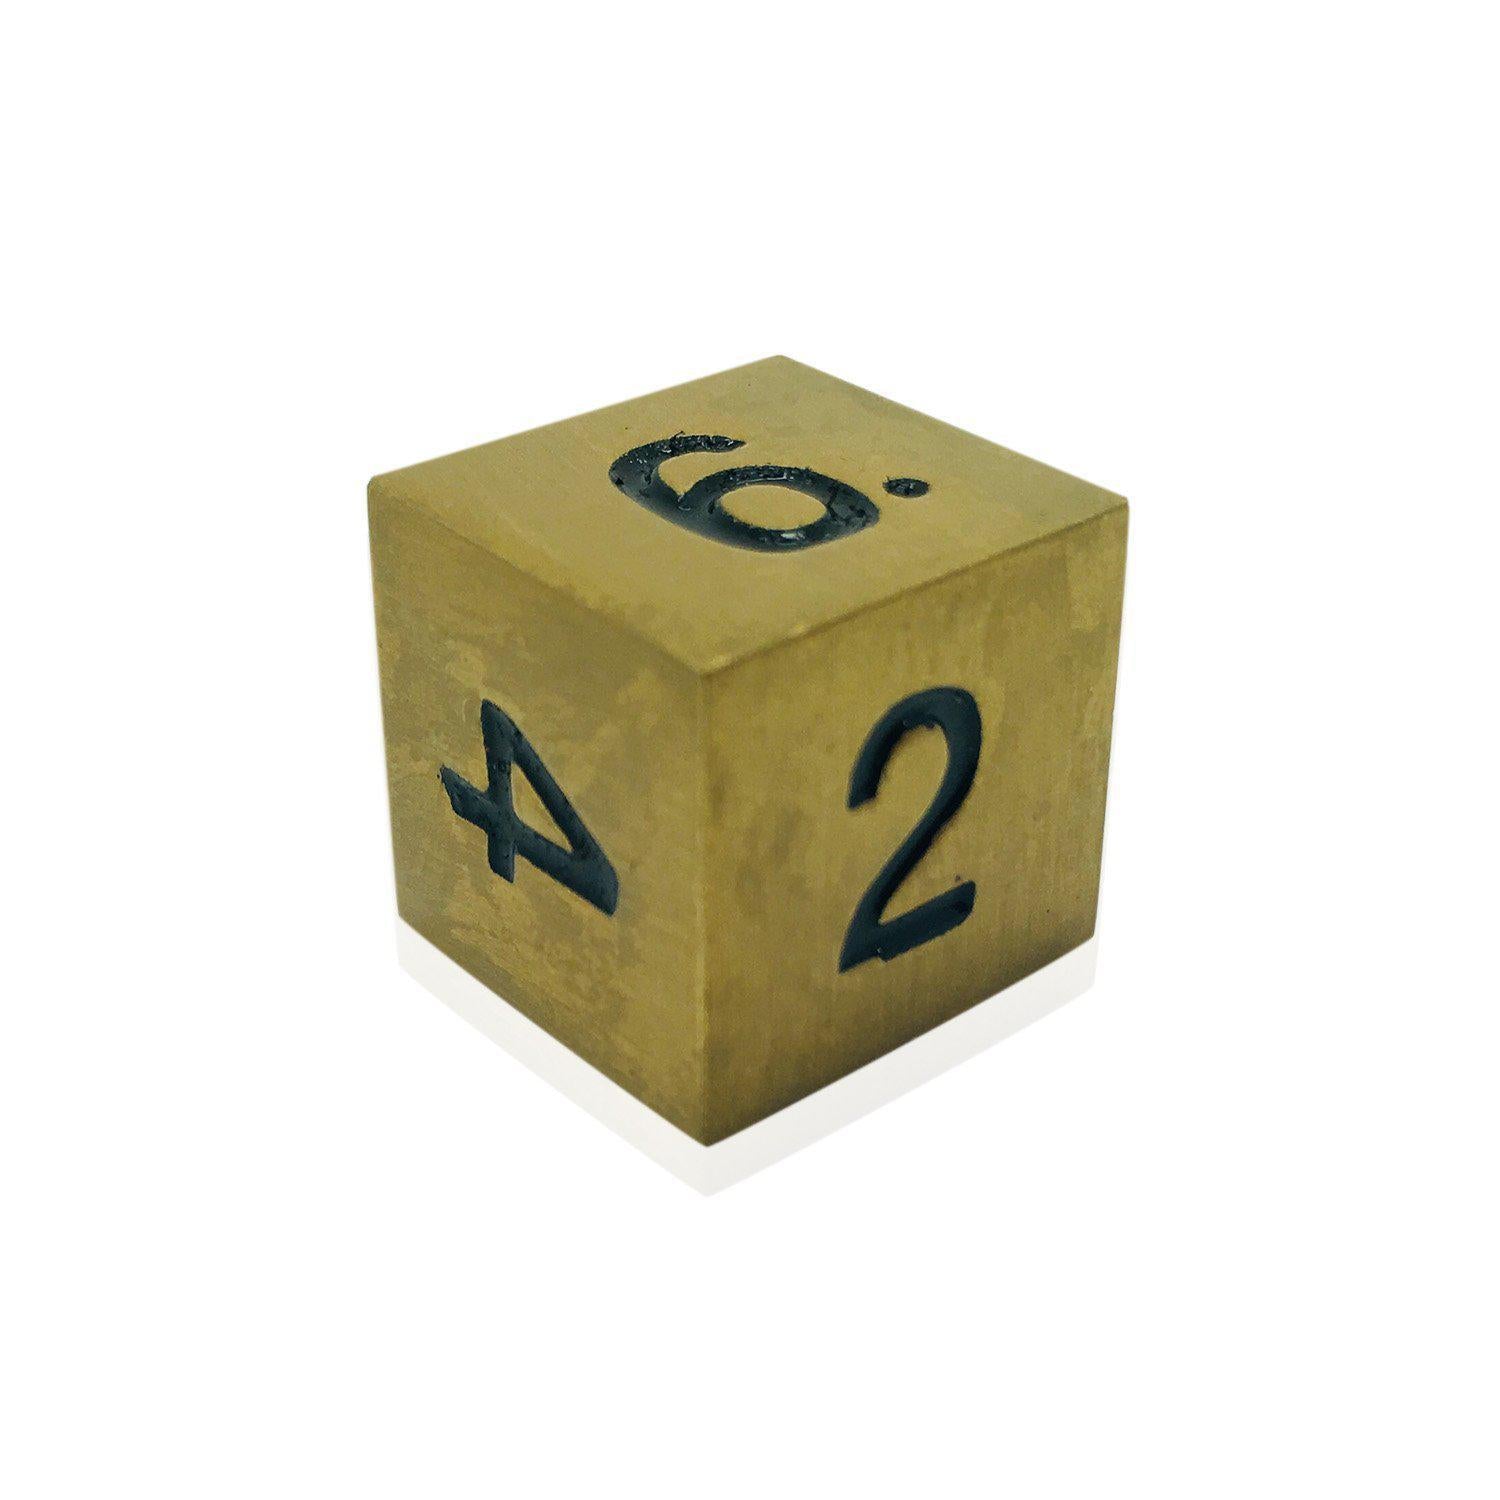 Single Alloy D6 in Dragons Gold by Norse Foundry-Dice-Norse Foundry-DND Dice-Polyhedral Dice-D20-Metal Dice-Precision Dice-Luxury Dice-Dungeons and Dragons-D&D-